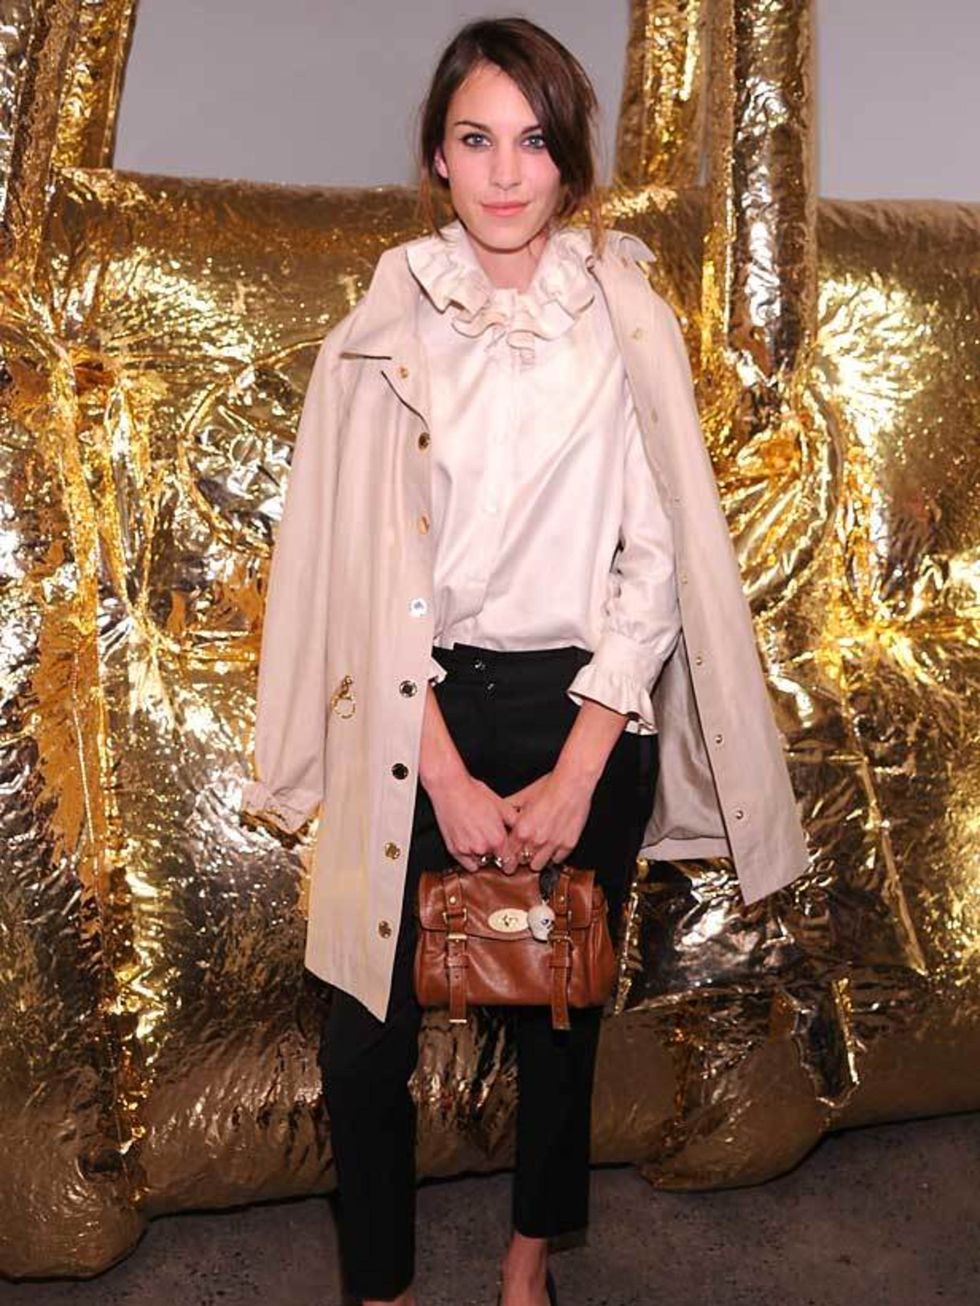 <p><a href="http://www.elleuk.com/starstyle/style-files/(section)/alexa-chung">Alexa Chung</a> paired <a href="http://www.elleuk.com/content/search?SearchText=charlotte+olympia&amp;SearchButton=Search">Charlotte Olympia</a> flats with the Polly Push Lock 